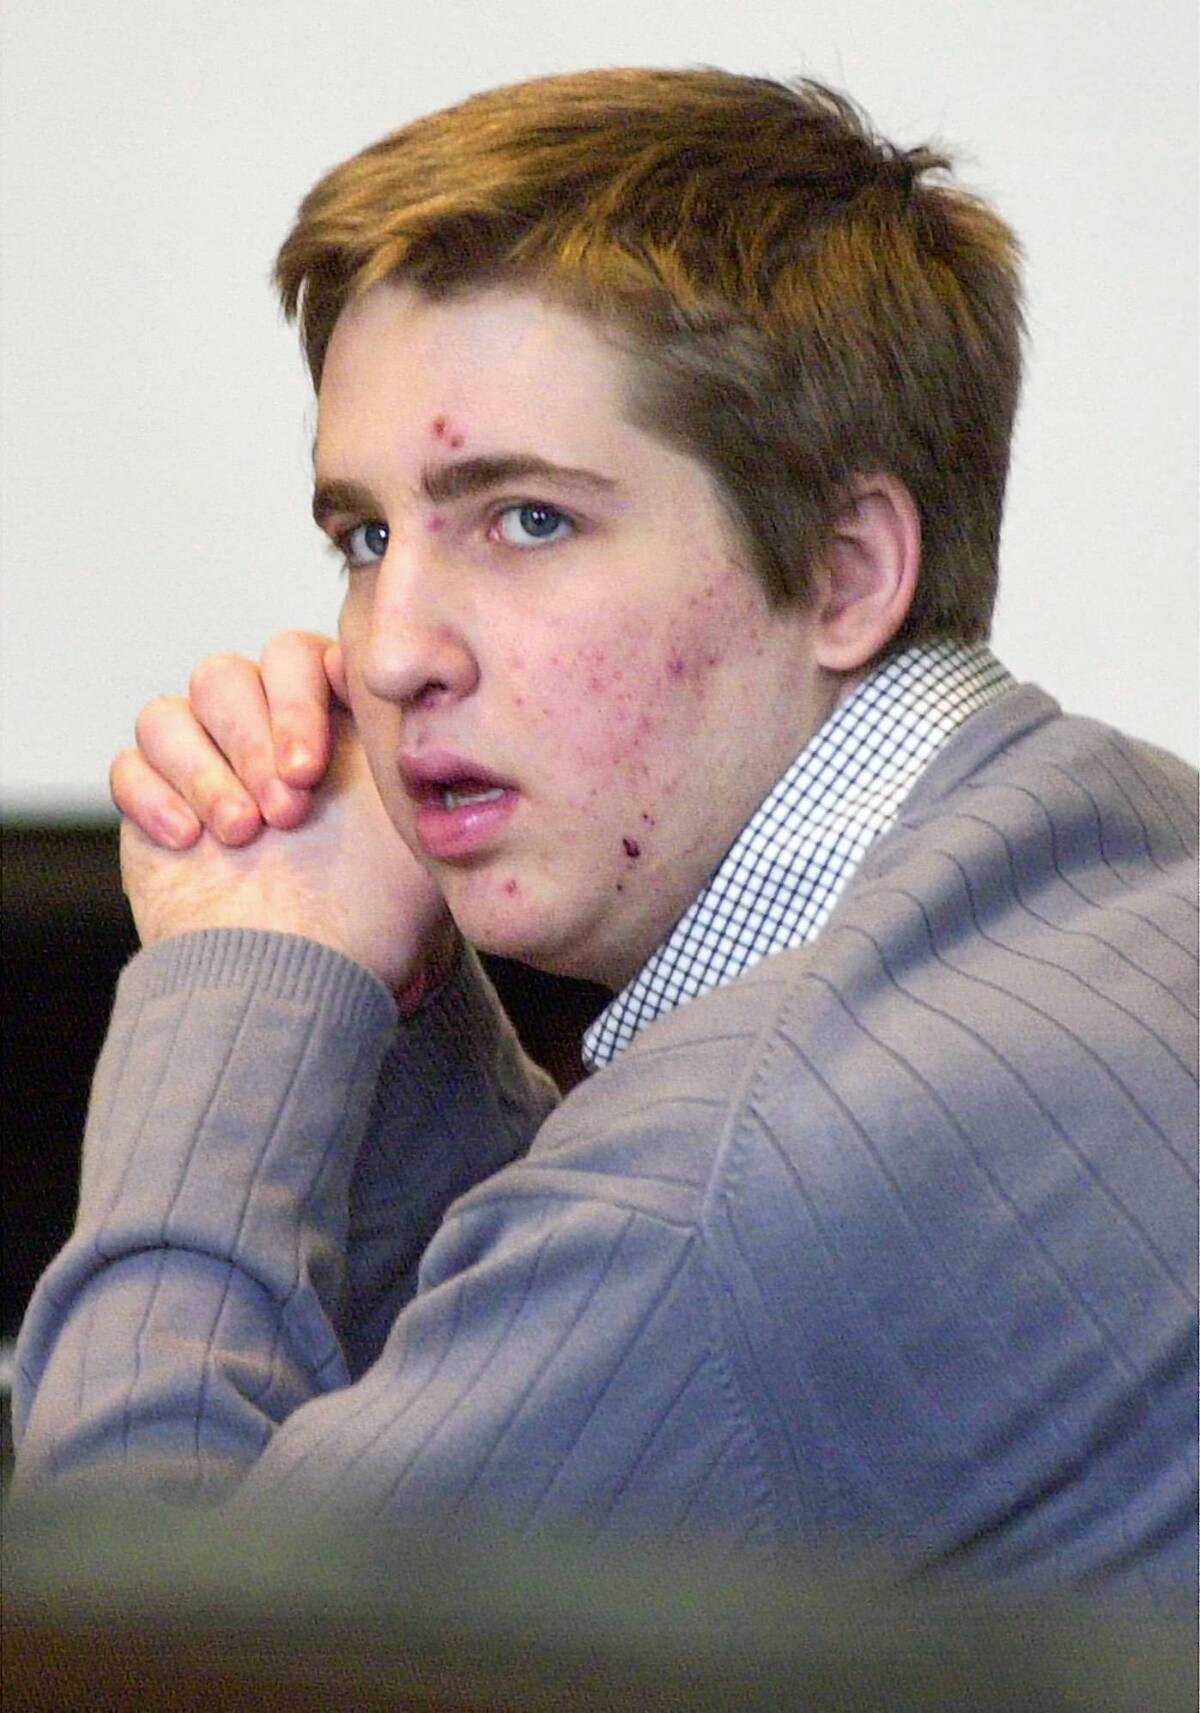 Former UC Santa Barbara student David Attias is shown during his trial in 2002. He was charged with four counts of murder in the running down of pedestrians in nearby Isla Vista. A jury found him legally insane.